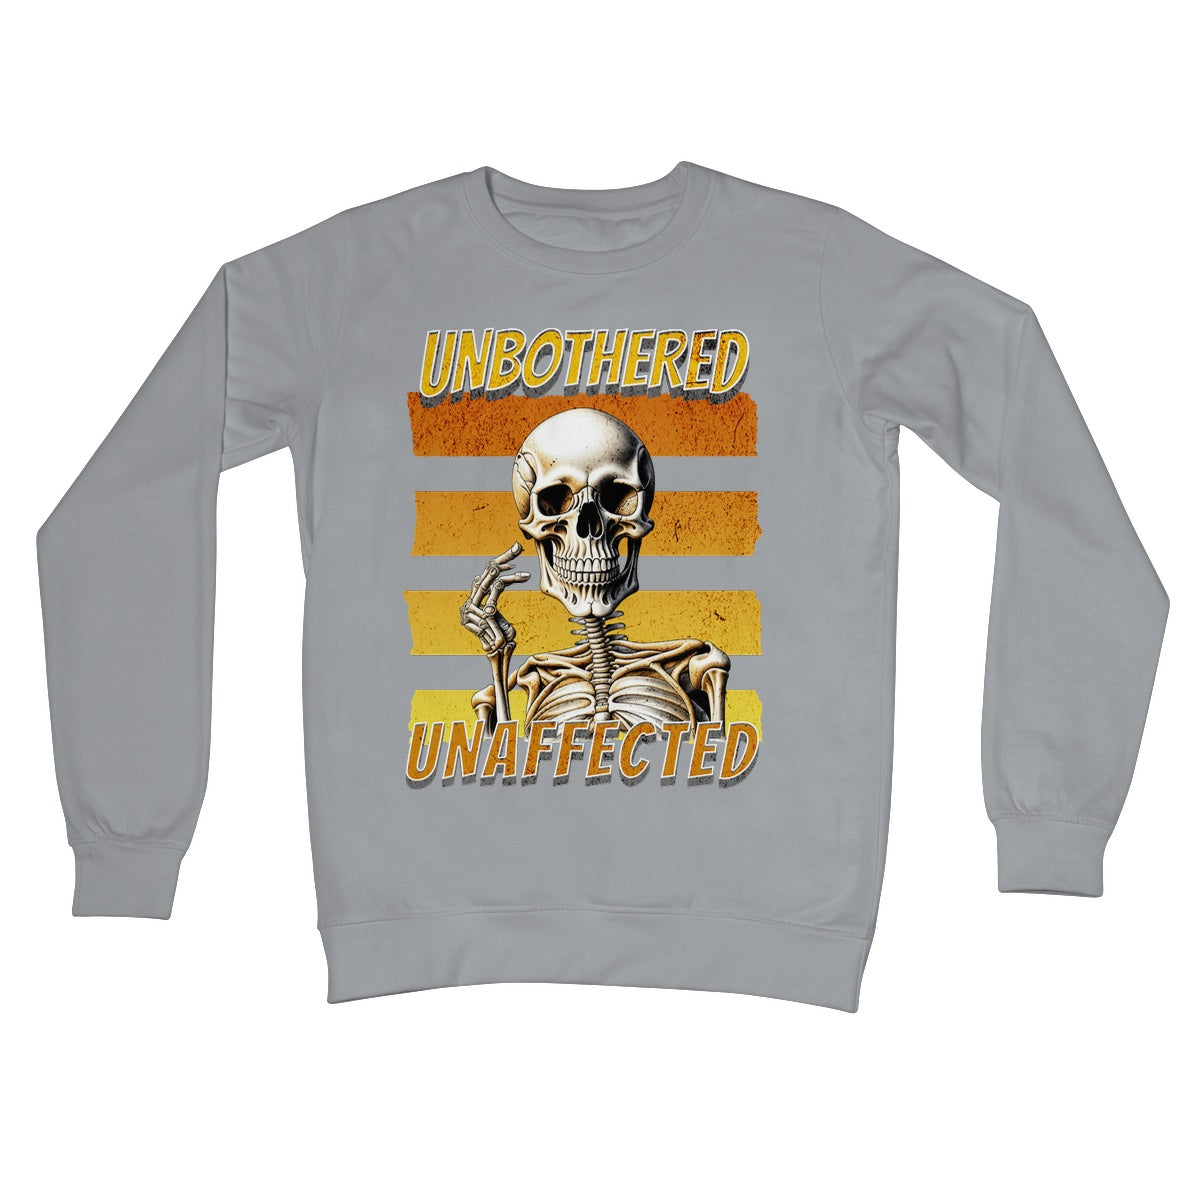 unbothered unaffected jumper steel grey